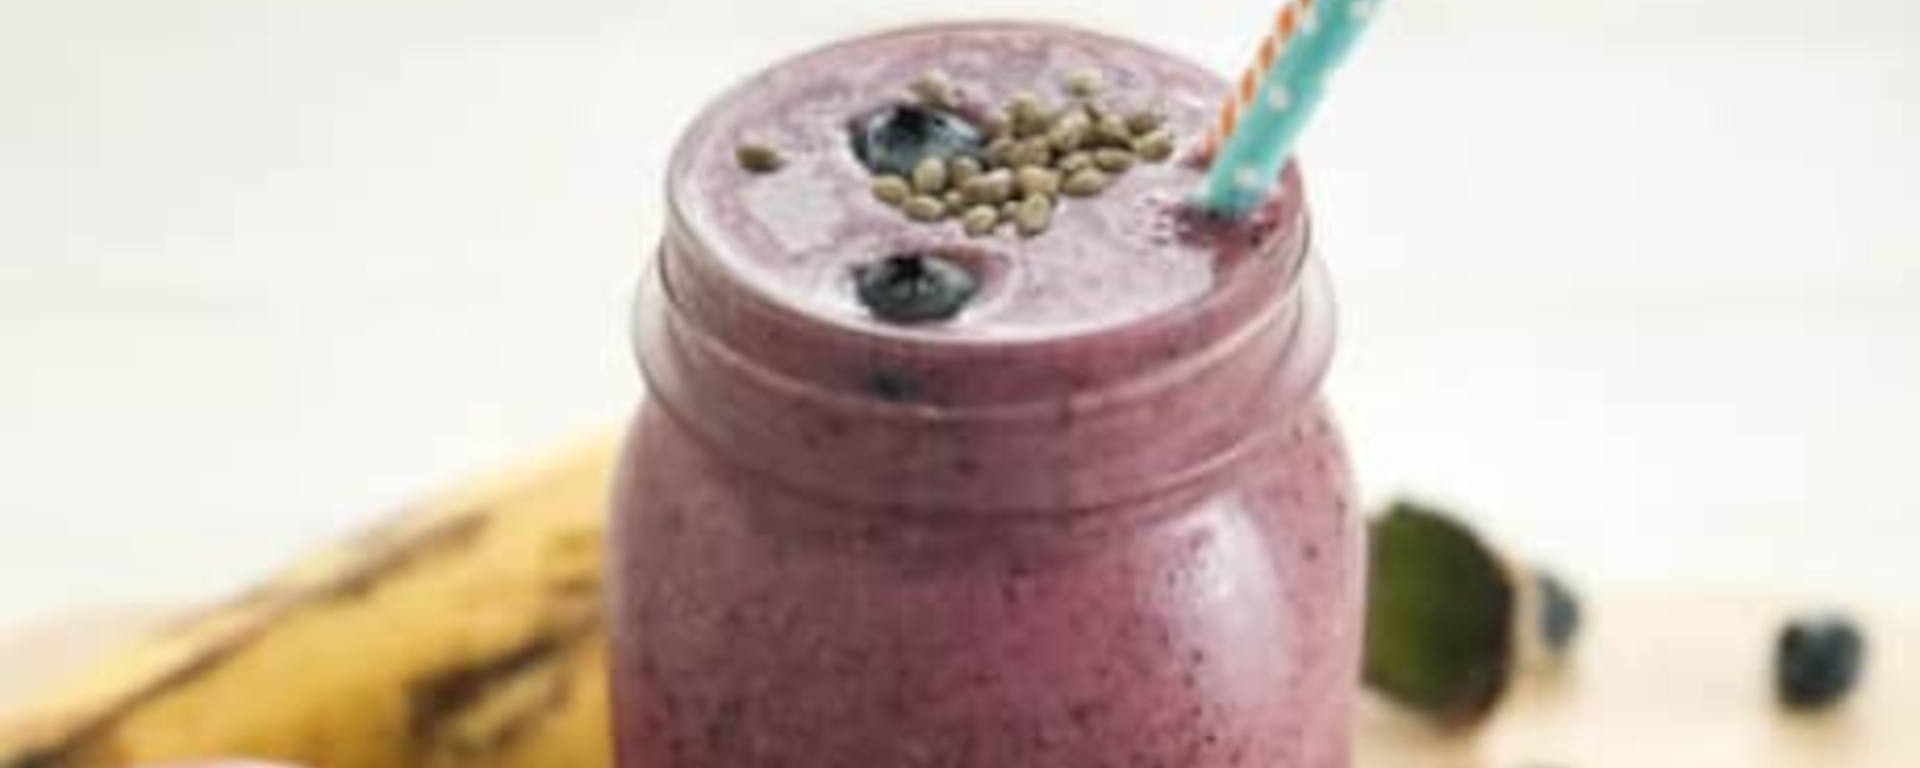 Blueberry, Pomegranate and Hemp Seed Smoothie